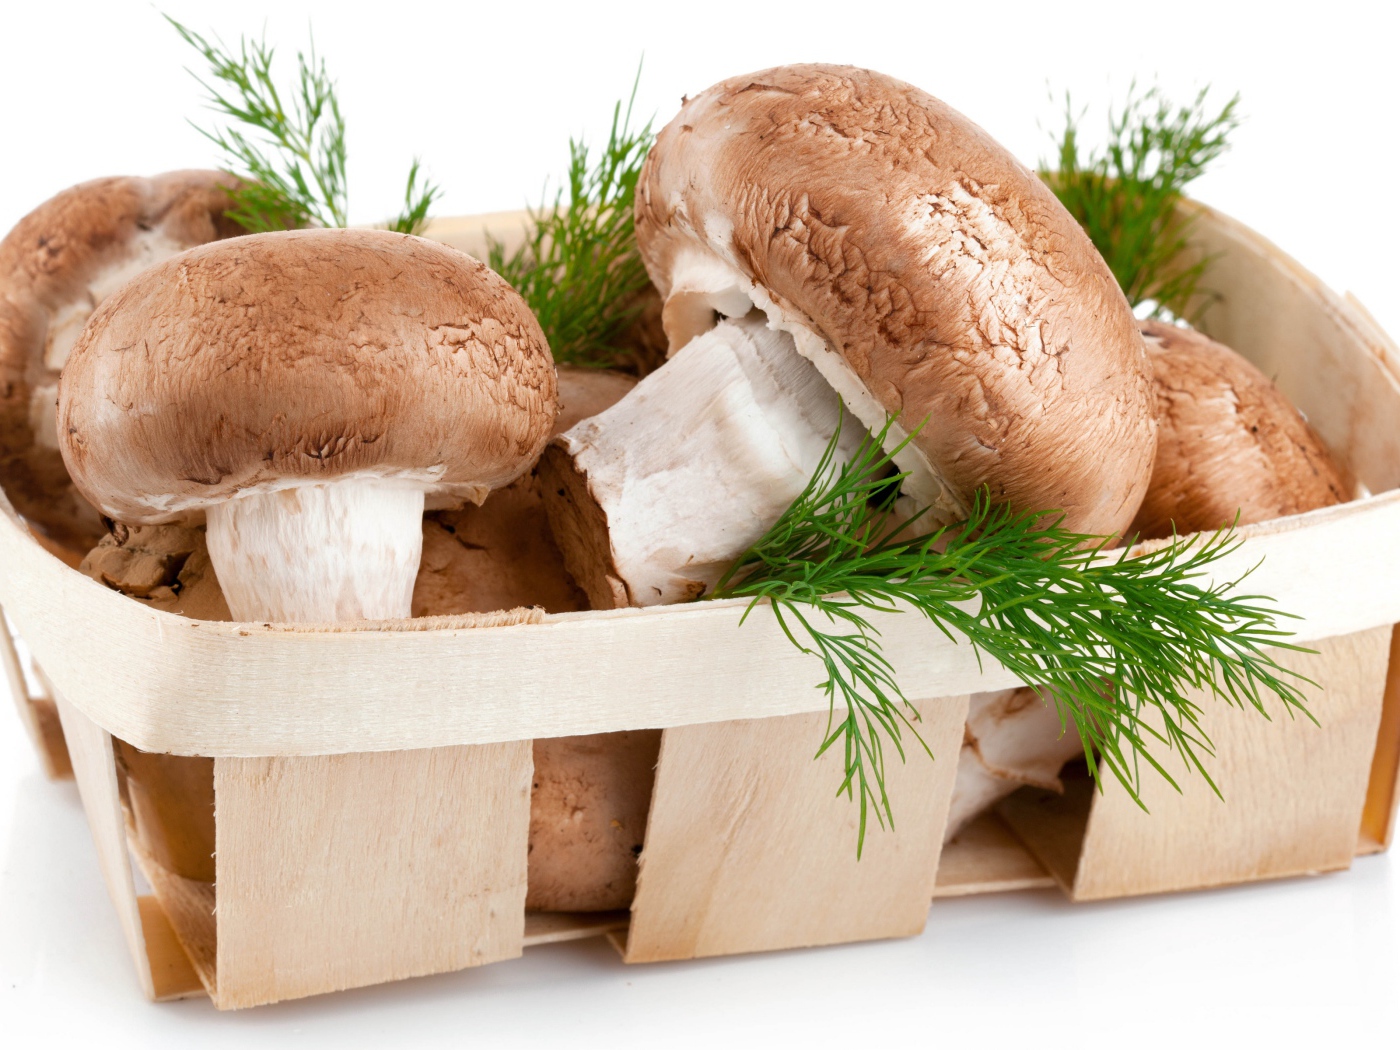 Champignon mushrooms in a wooden basket with dill on a white background